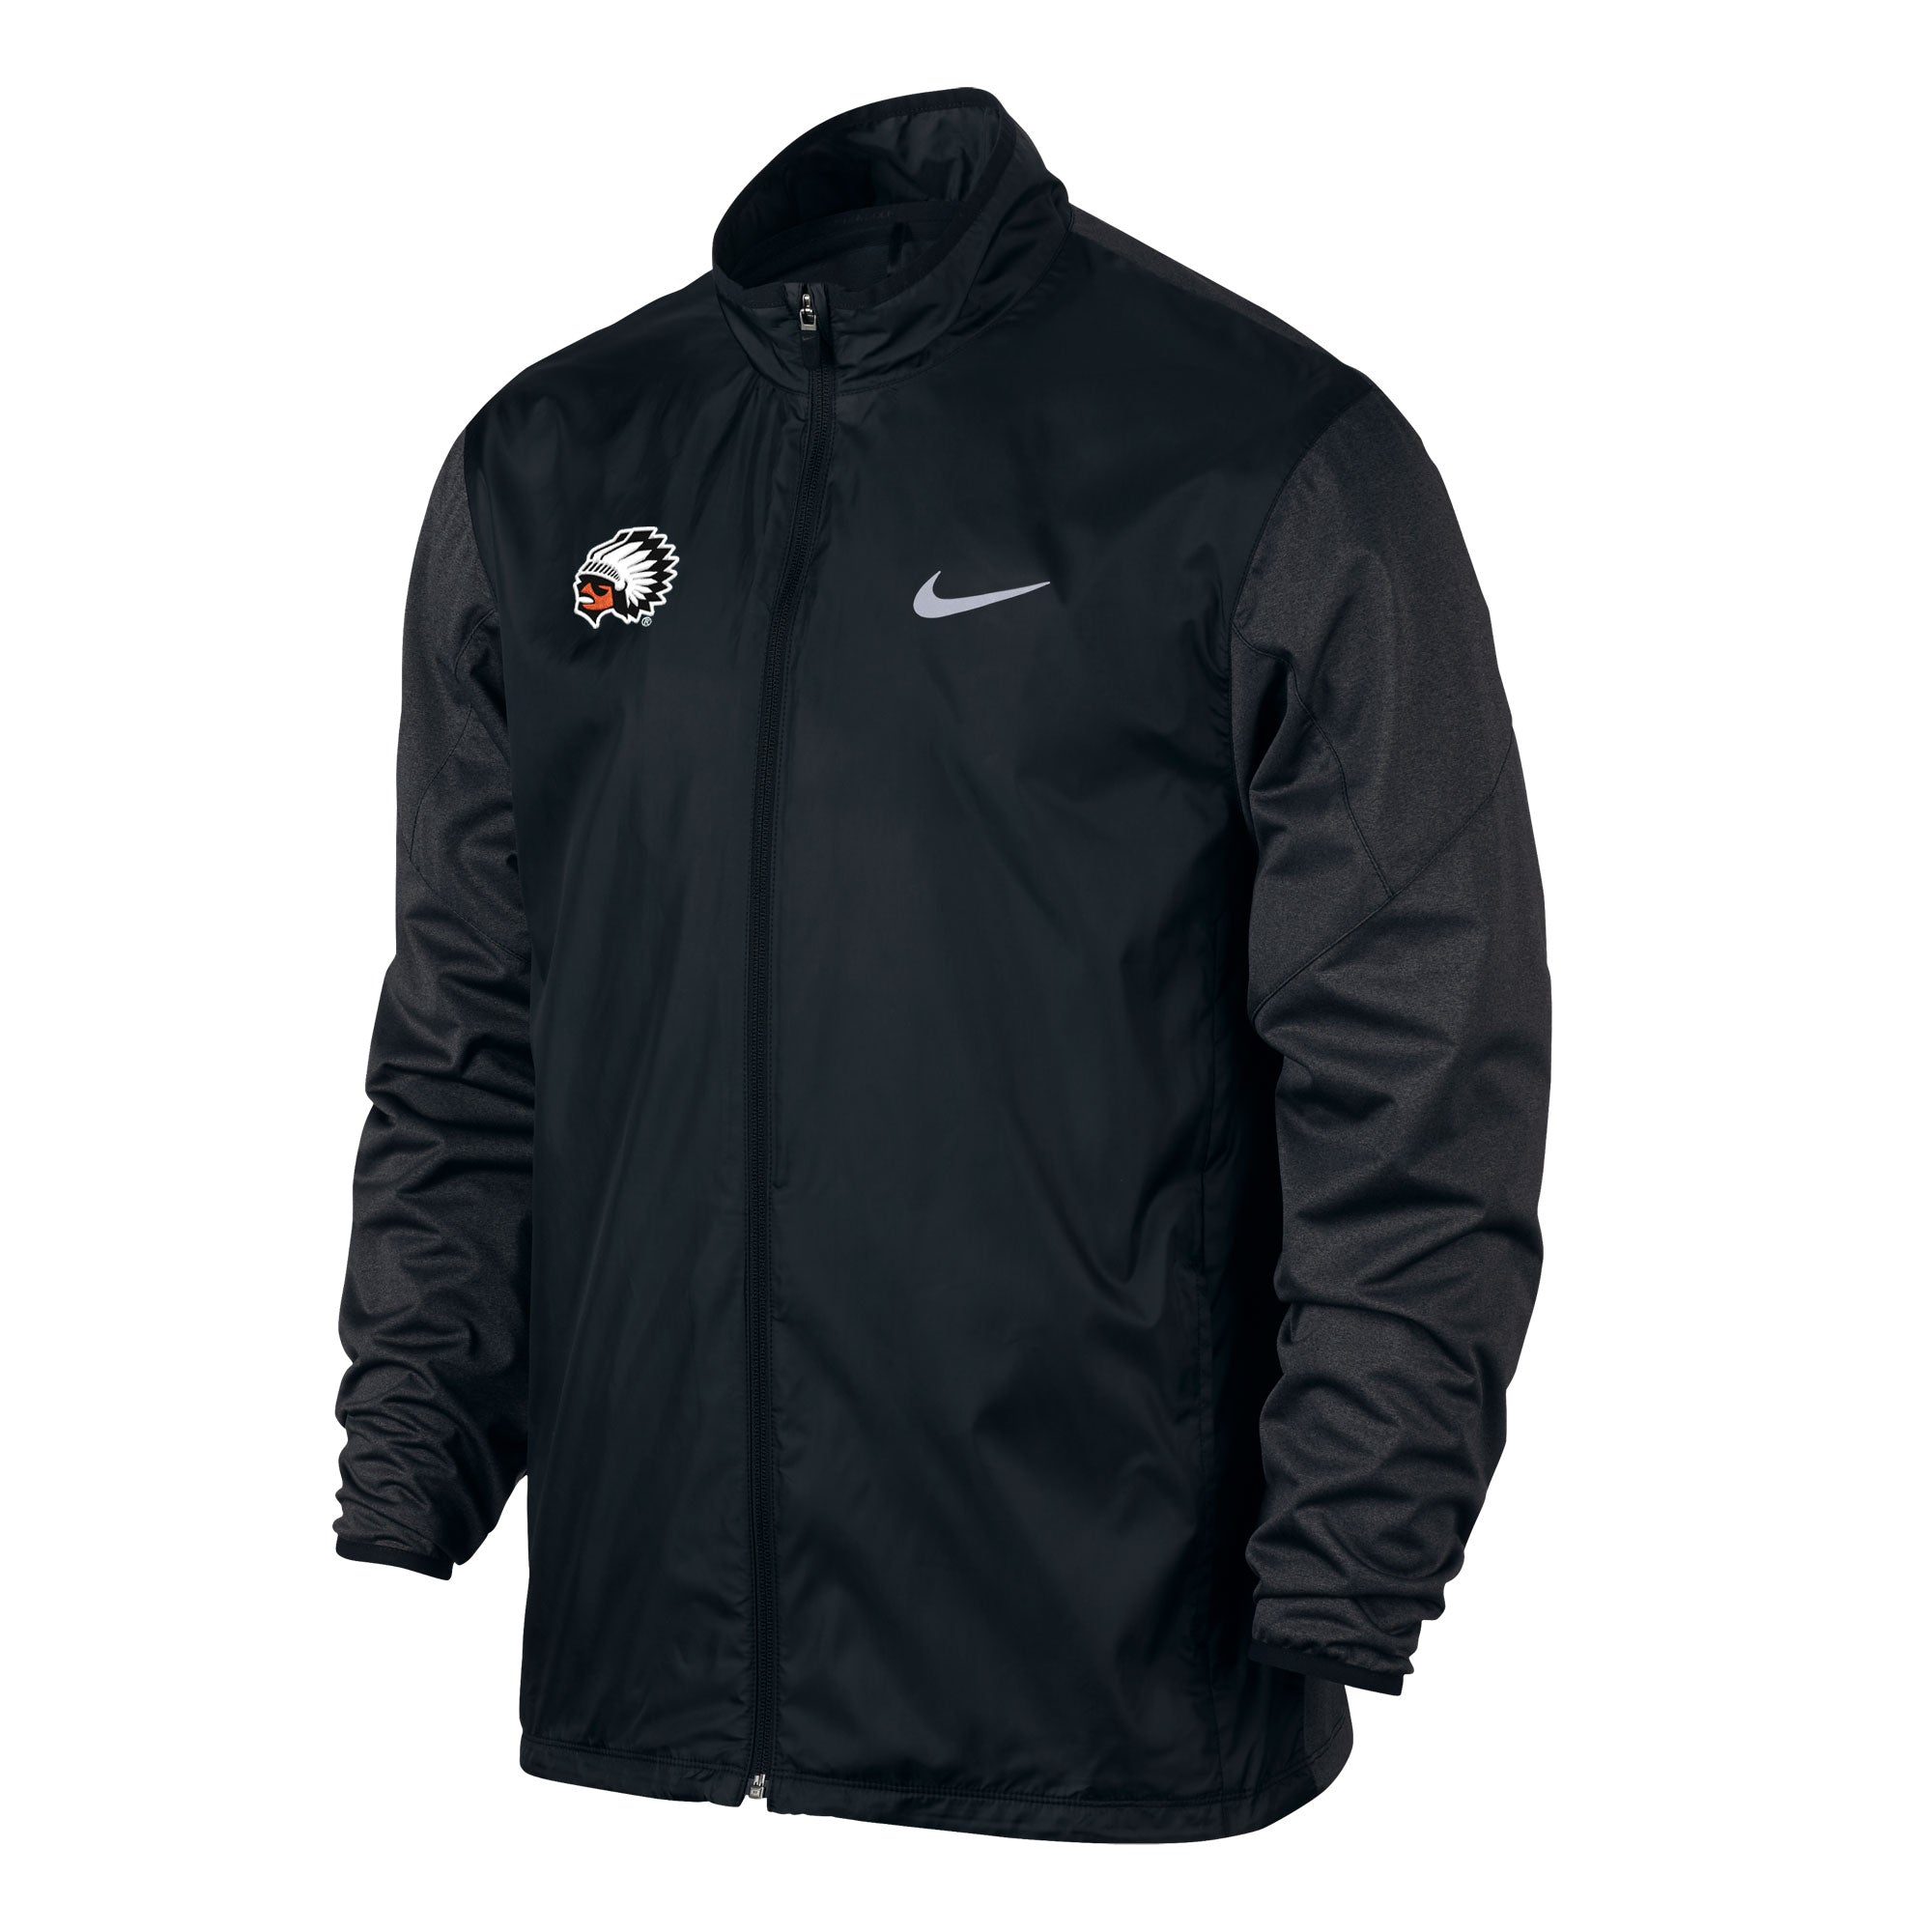 Nike Golf Shield Full Zip Jacket – Brother Rice Bookstore